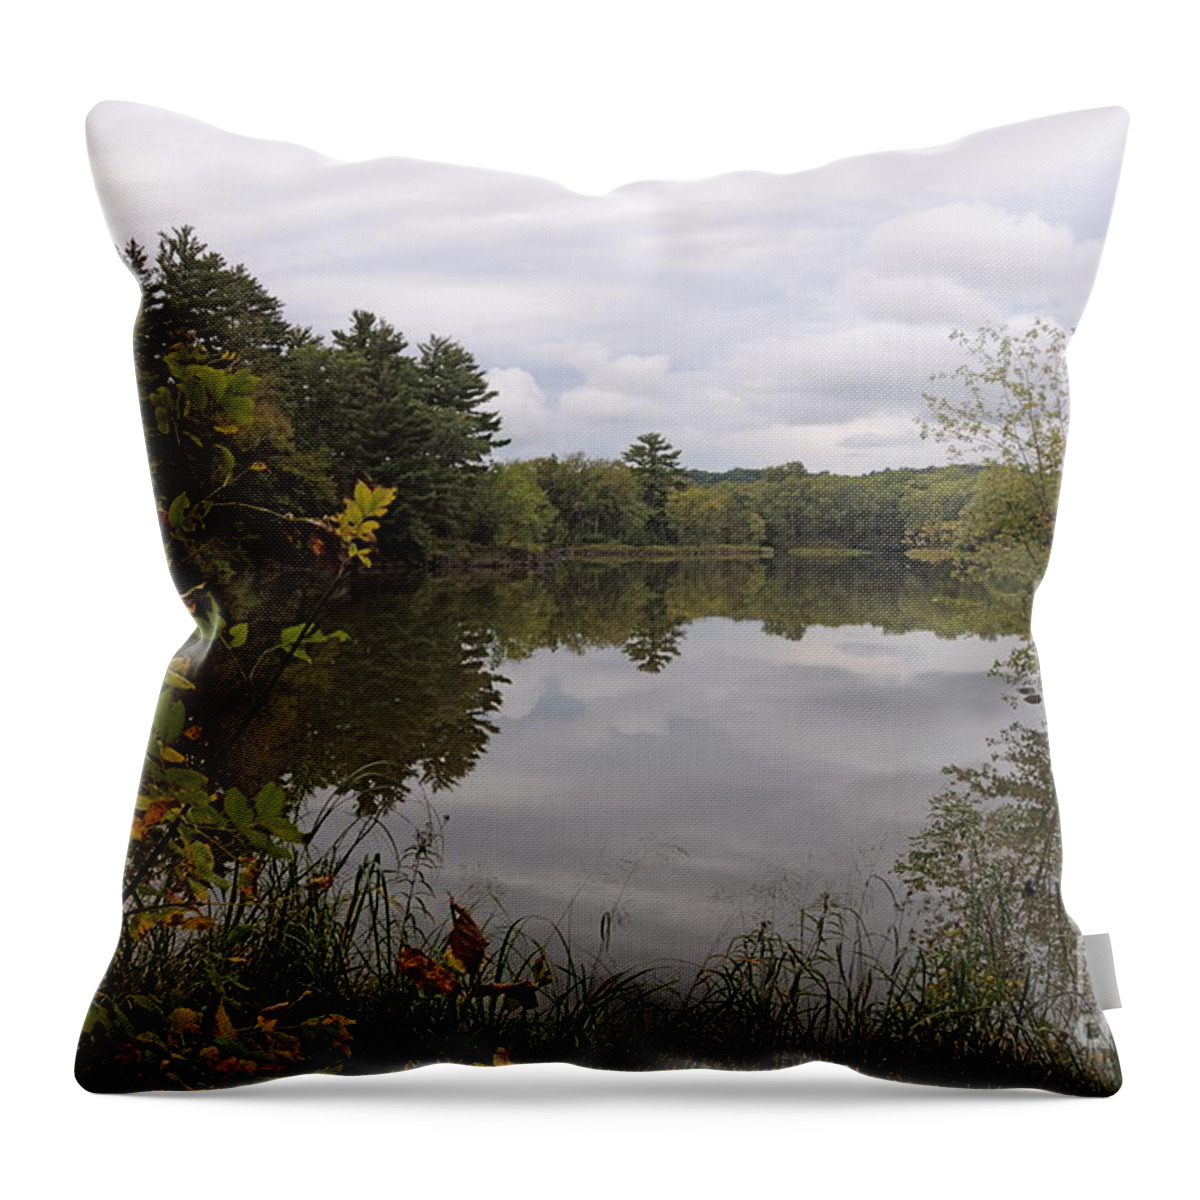 Rainy Day Throw Pillow featuring the photograph Rainy Day Reflections by Sandra Updyke